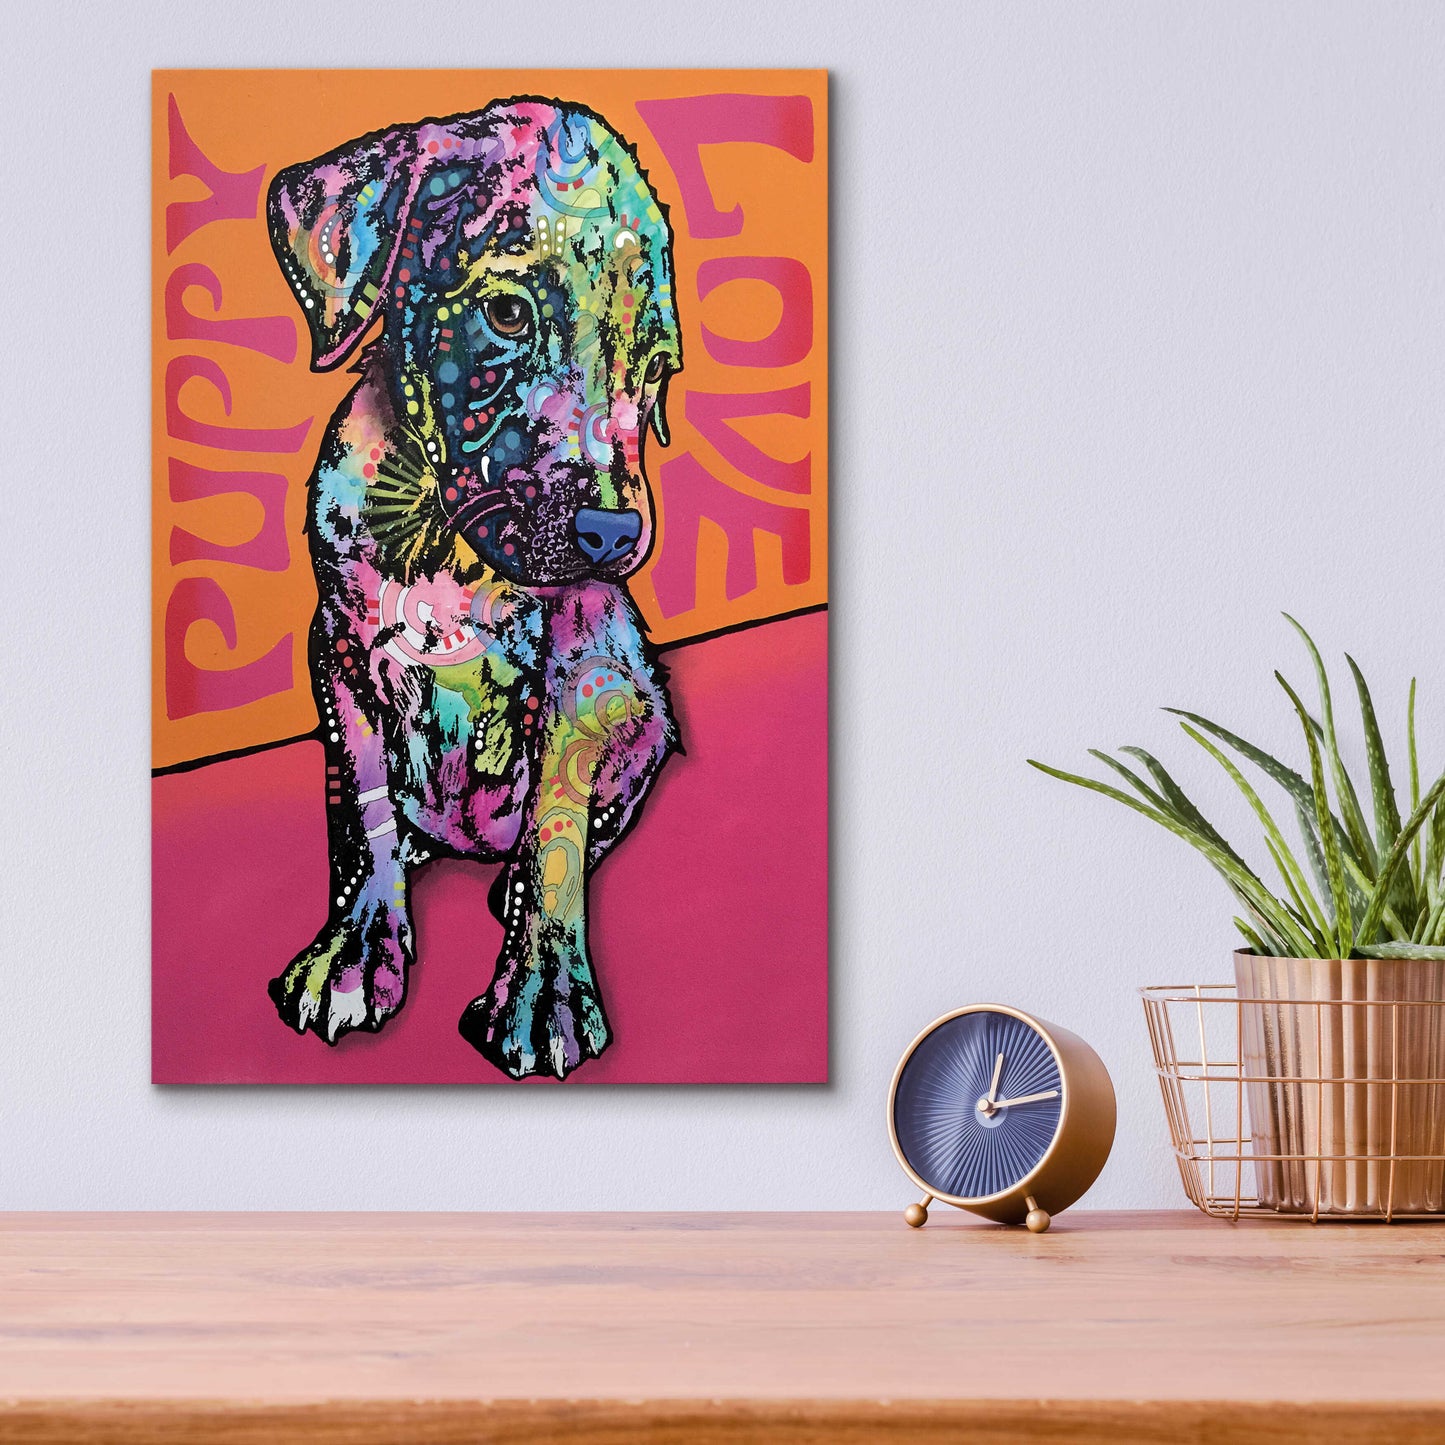 Epic Art 'Puppy Love' by Dean Russo, Acrylic Glass Wall Art,12x16